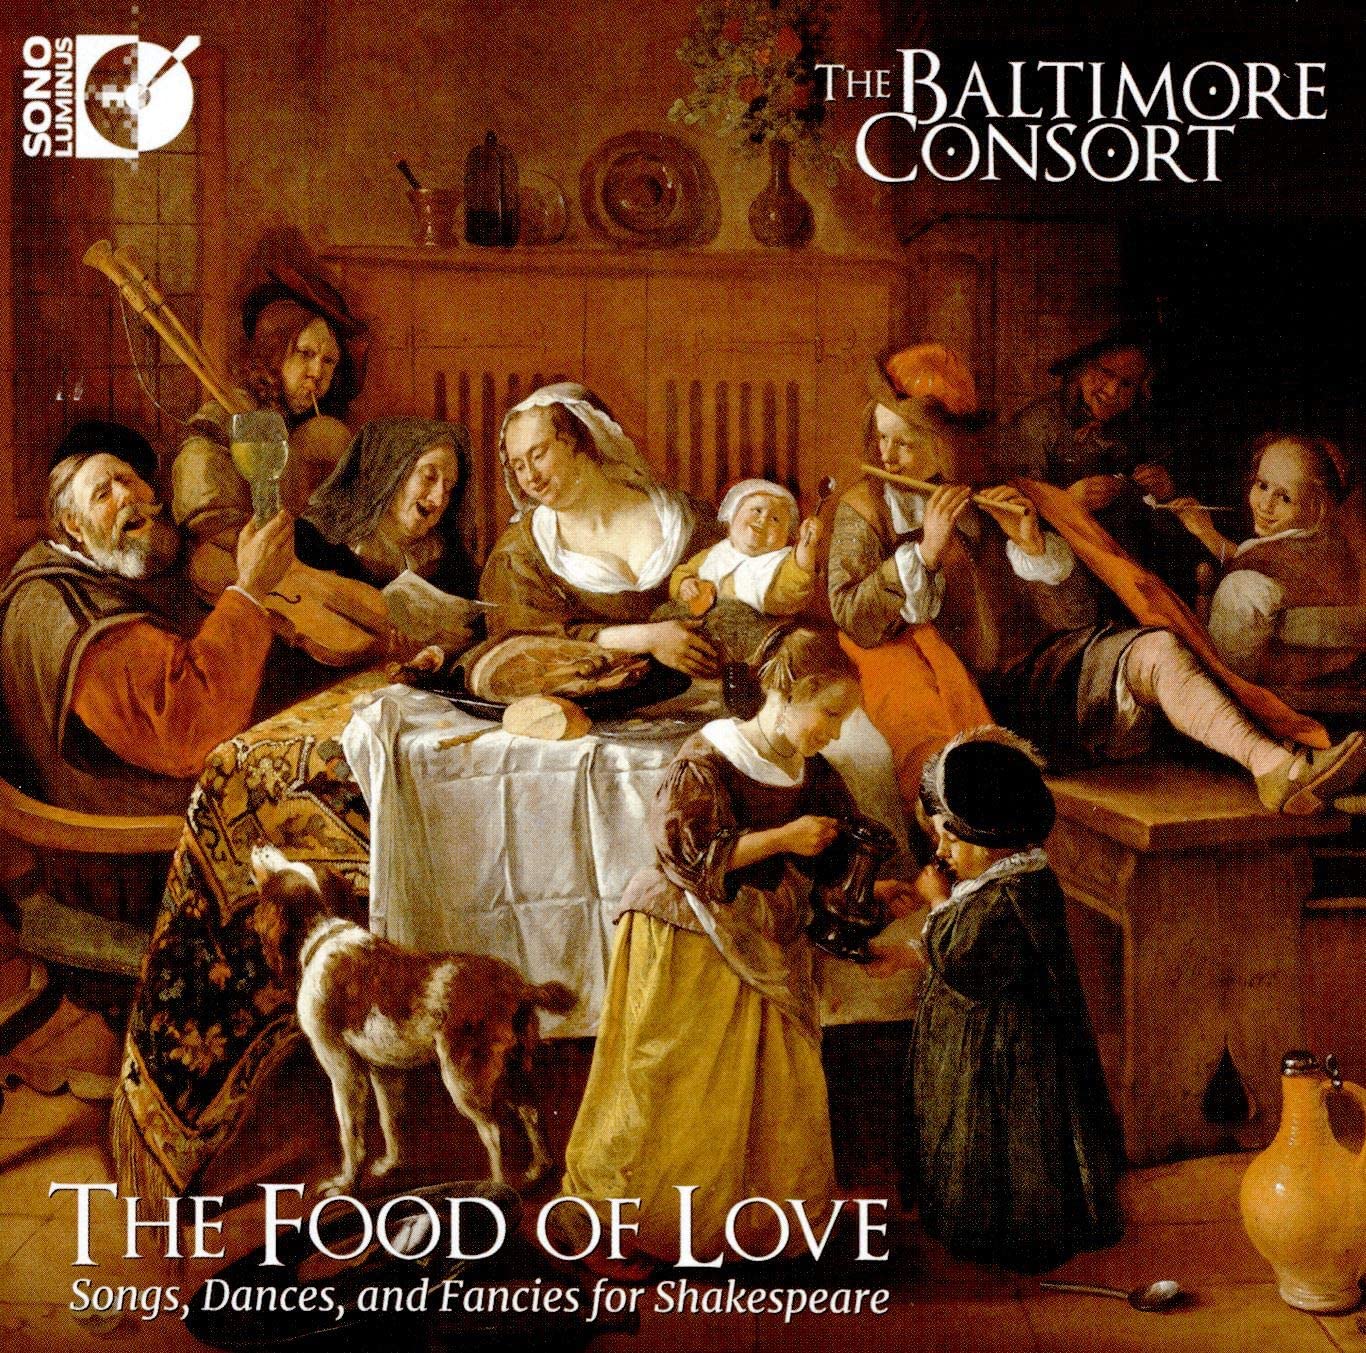 The Baltimore Consort perform music related to Shakespeare